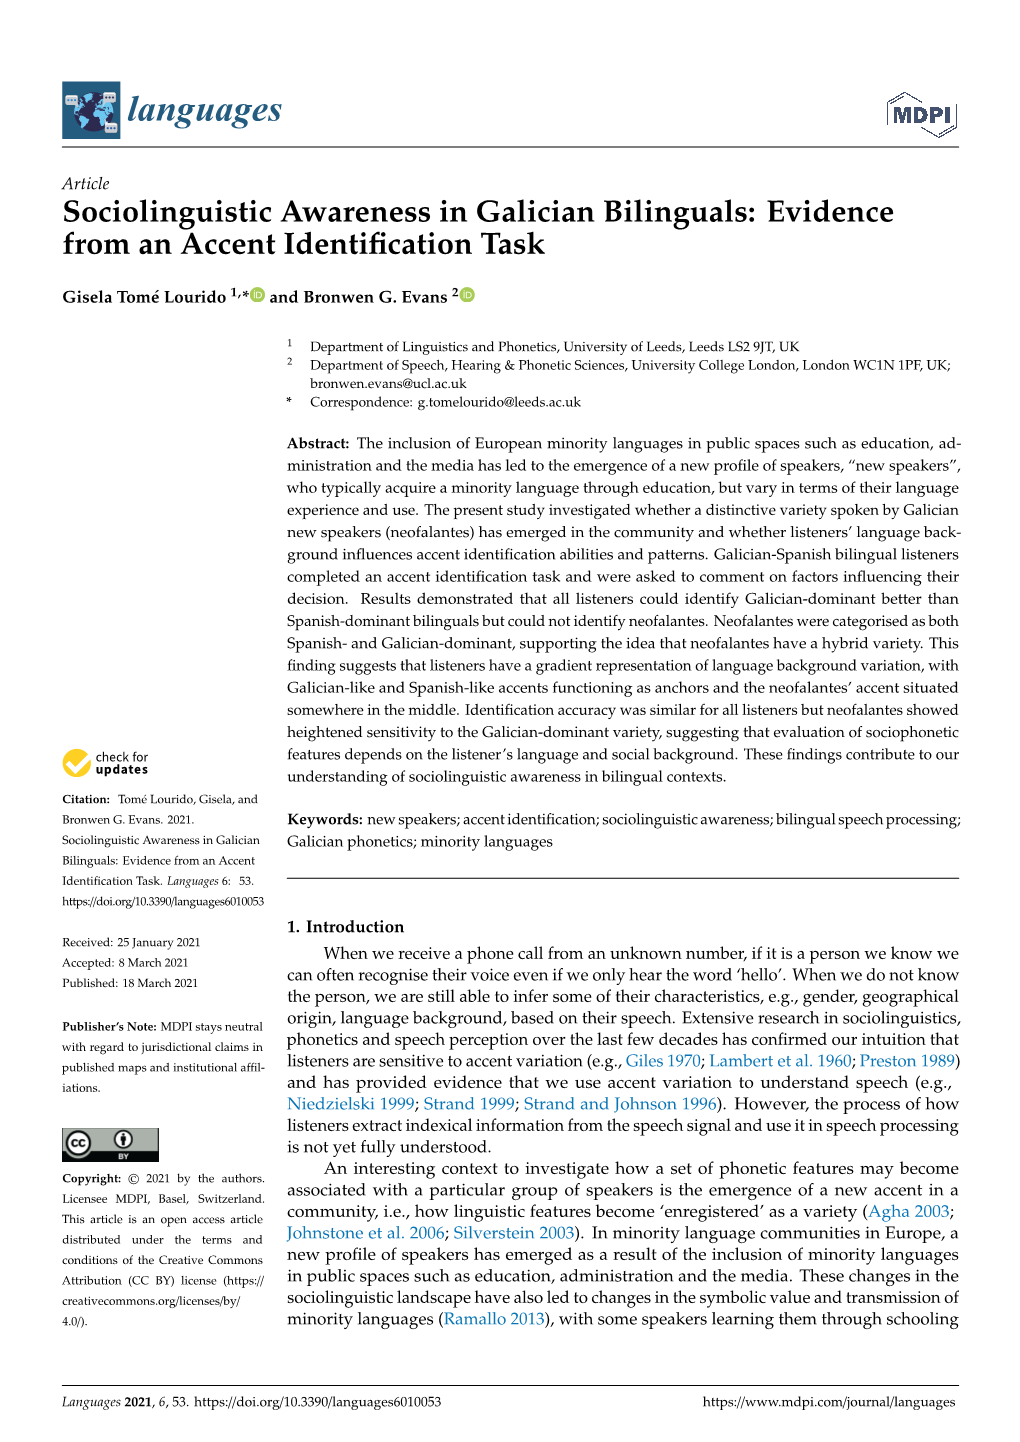 Sociolinguistic Awareness in Galician Bilinguals: Evidence from an Accent Identiﬁcation Task